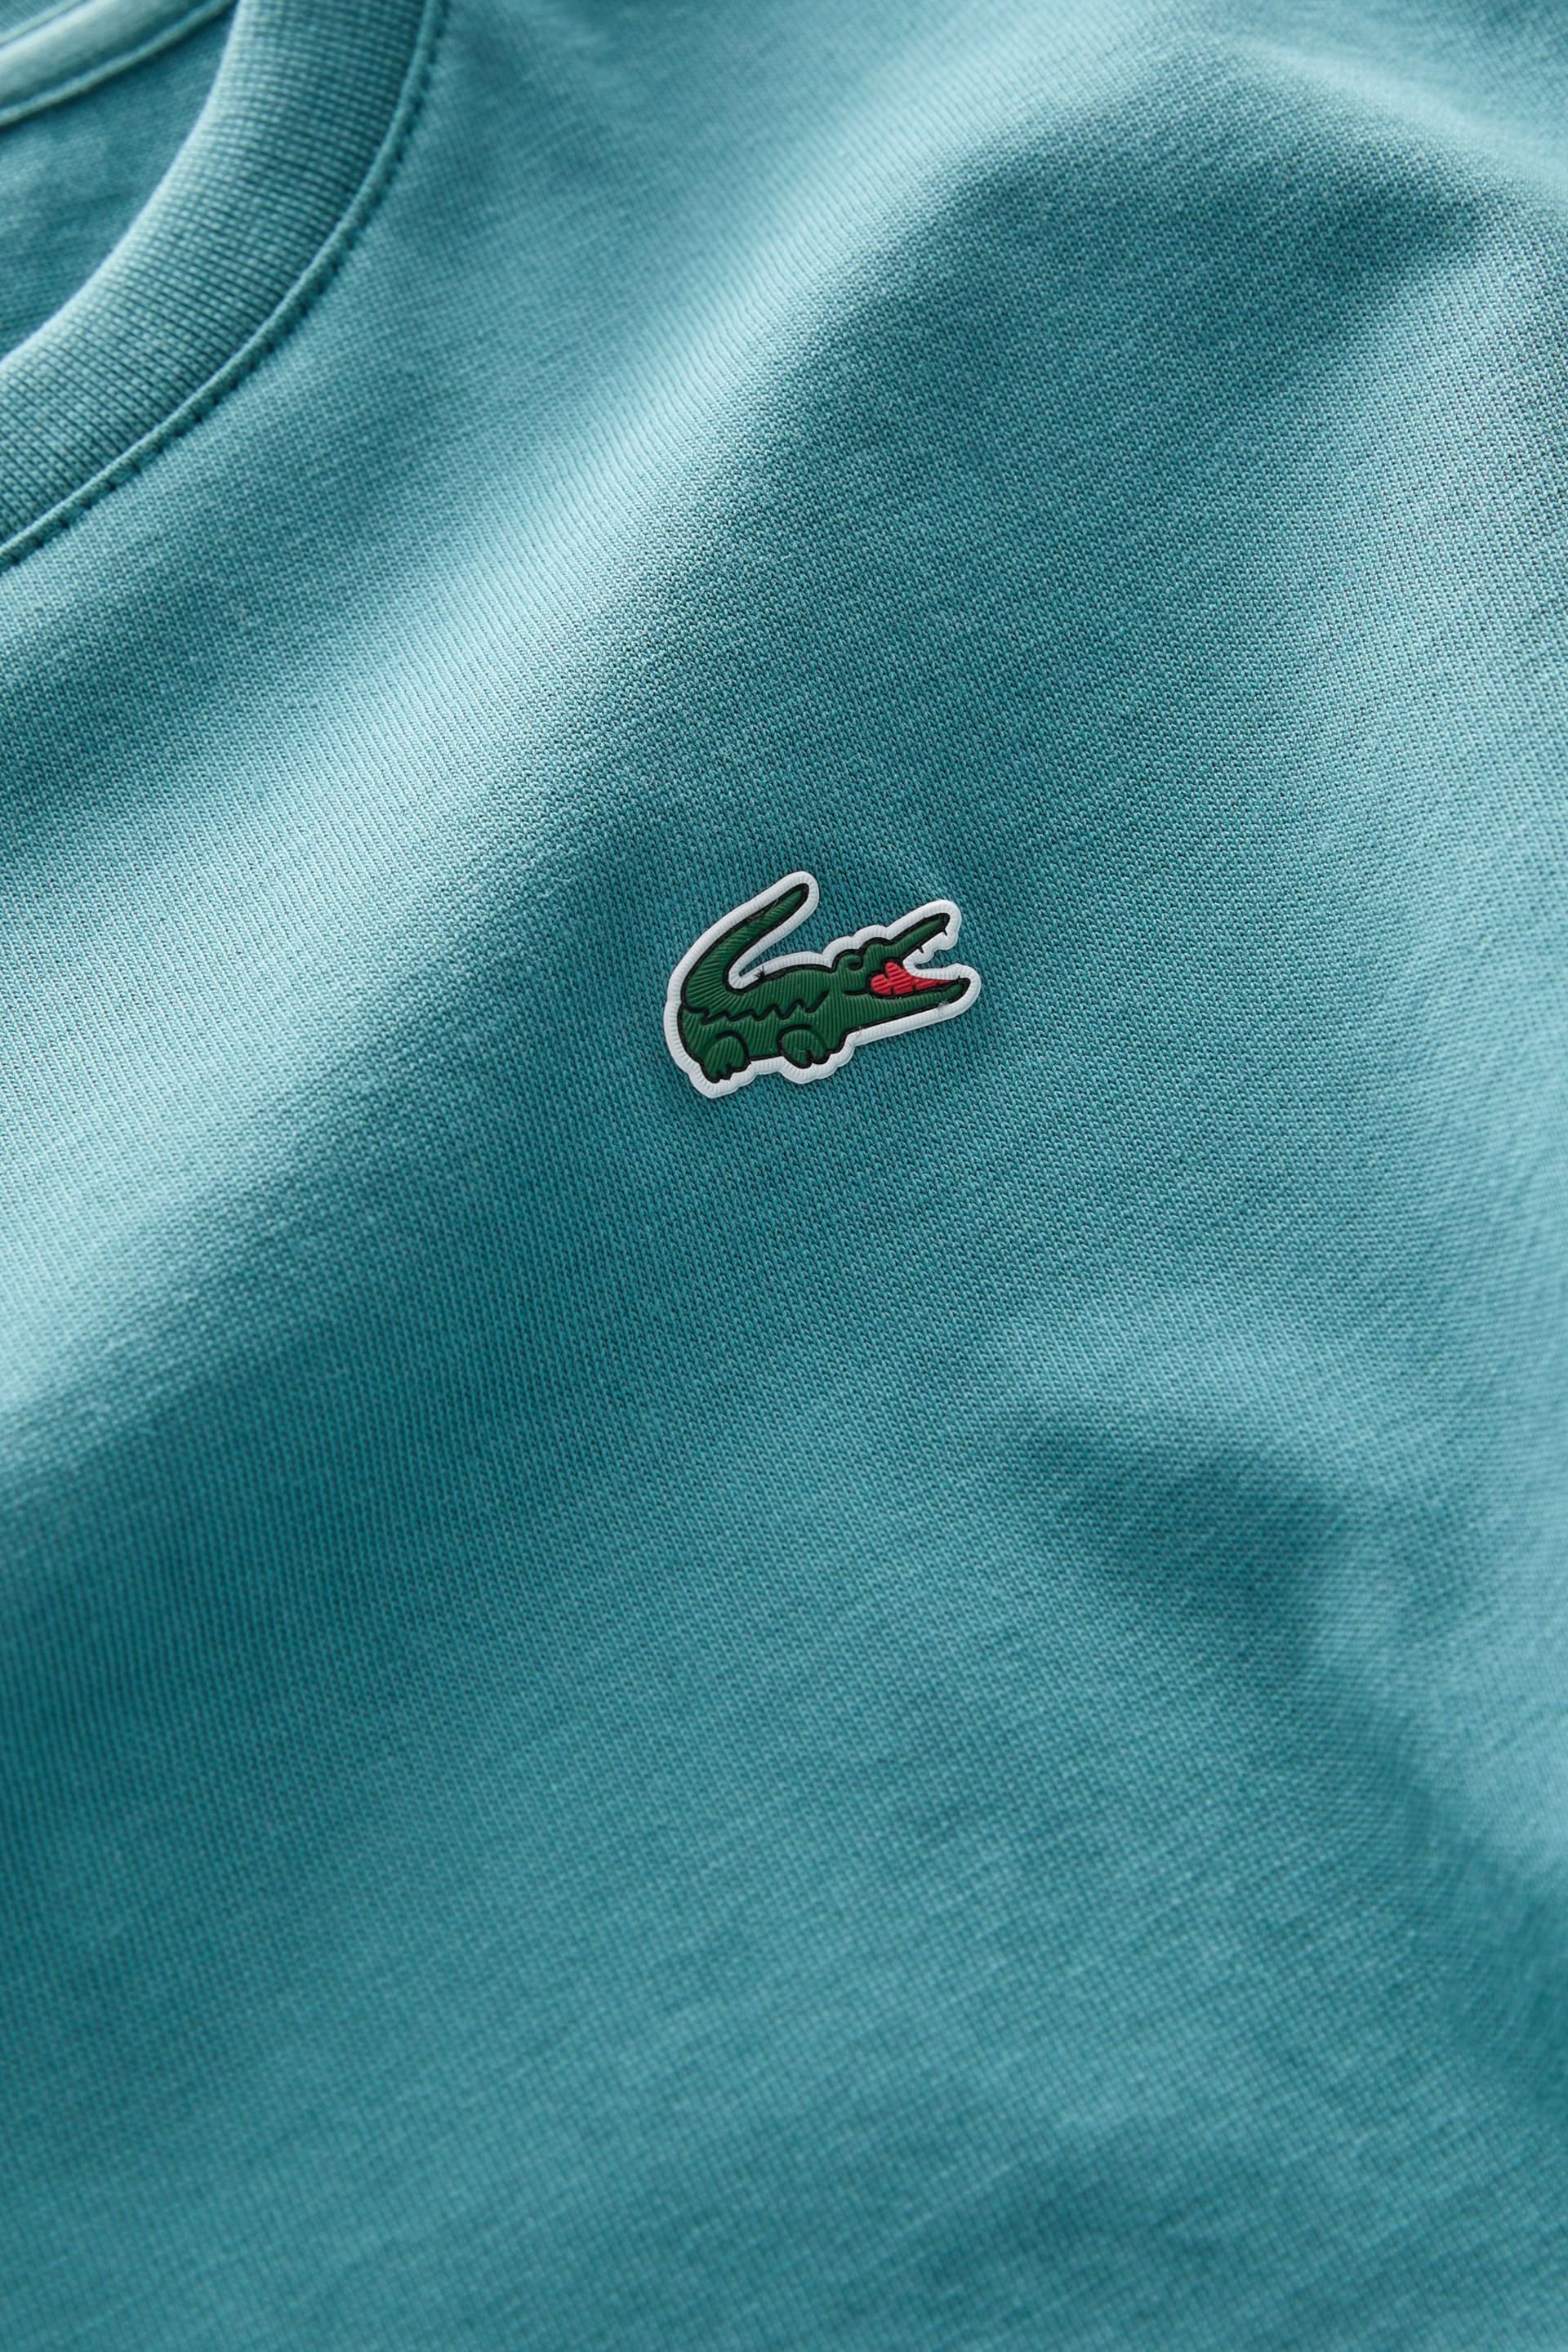 Lacoste Children's Sports Breathable T-Shirt - Image 3 of 3